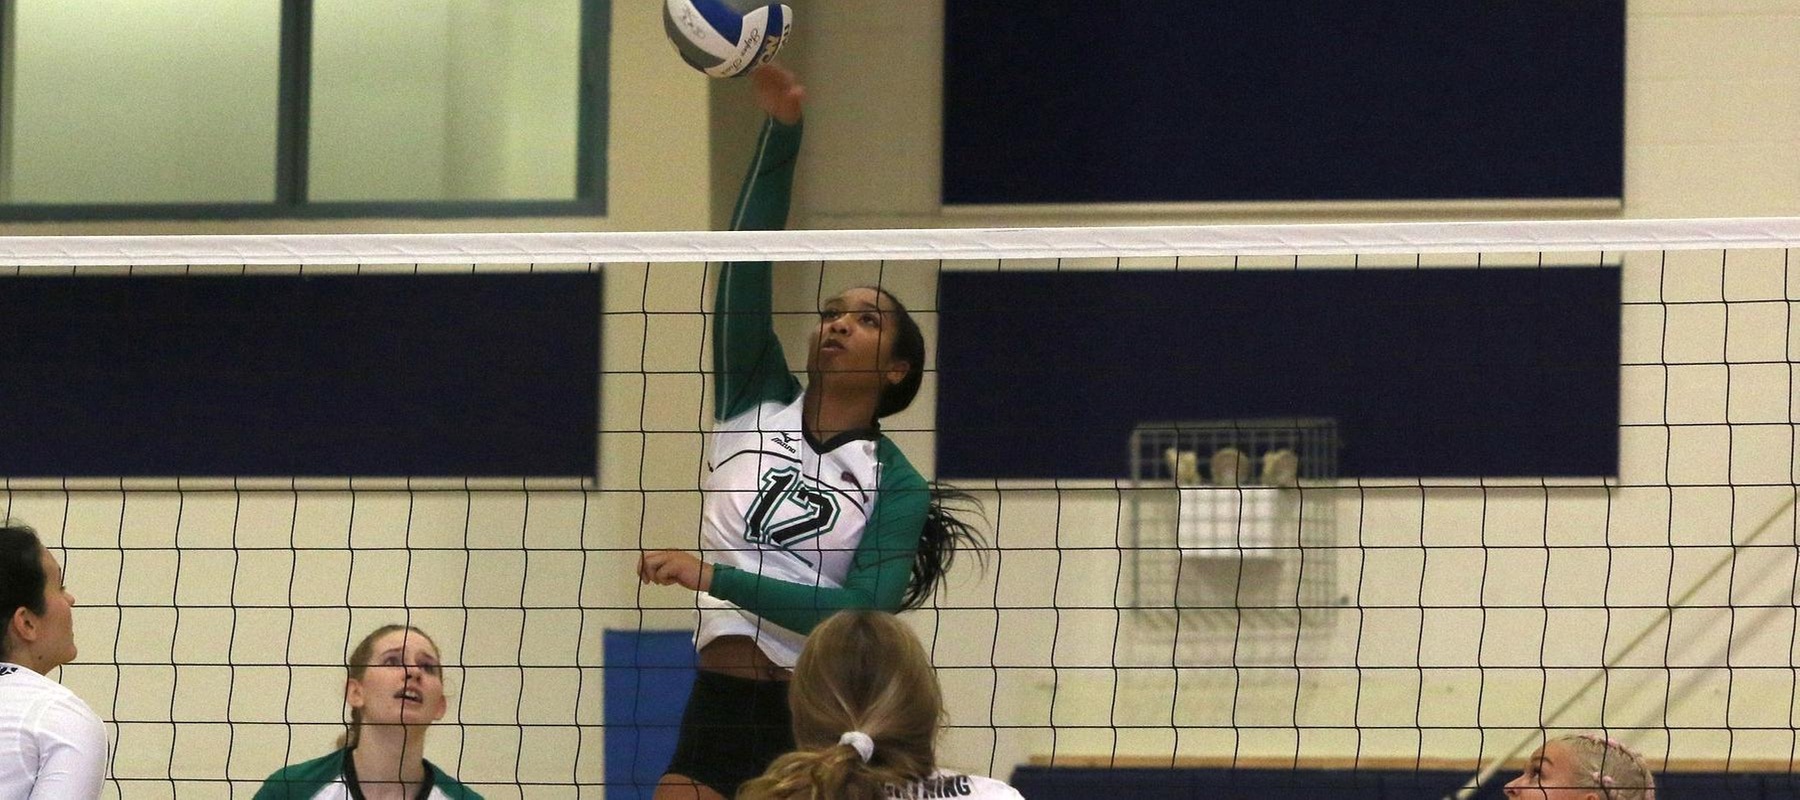 (12) Rebecca Rawlinson kills a shot for a point. Wilmington University Volleyball vs. Goldey-Beacom College @ Joseph West Jones College Center. October 13, 2018. (Wilmington, Delaware/ Photo by Frank Stallworth)